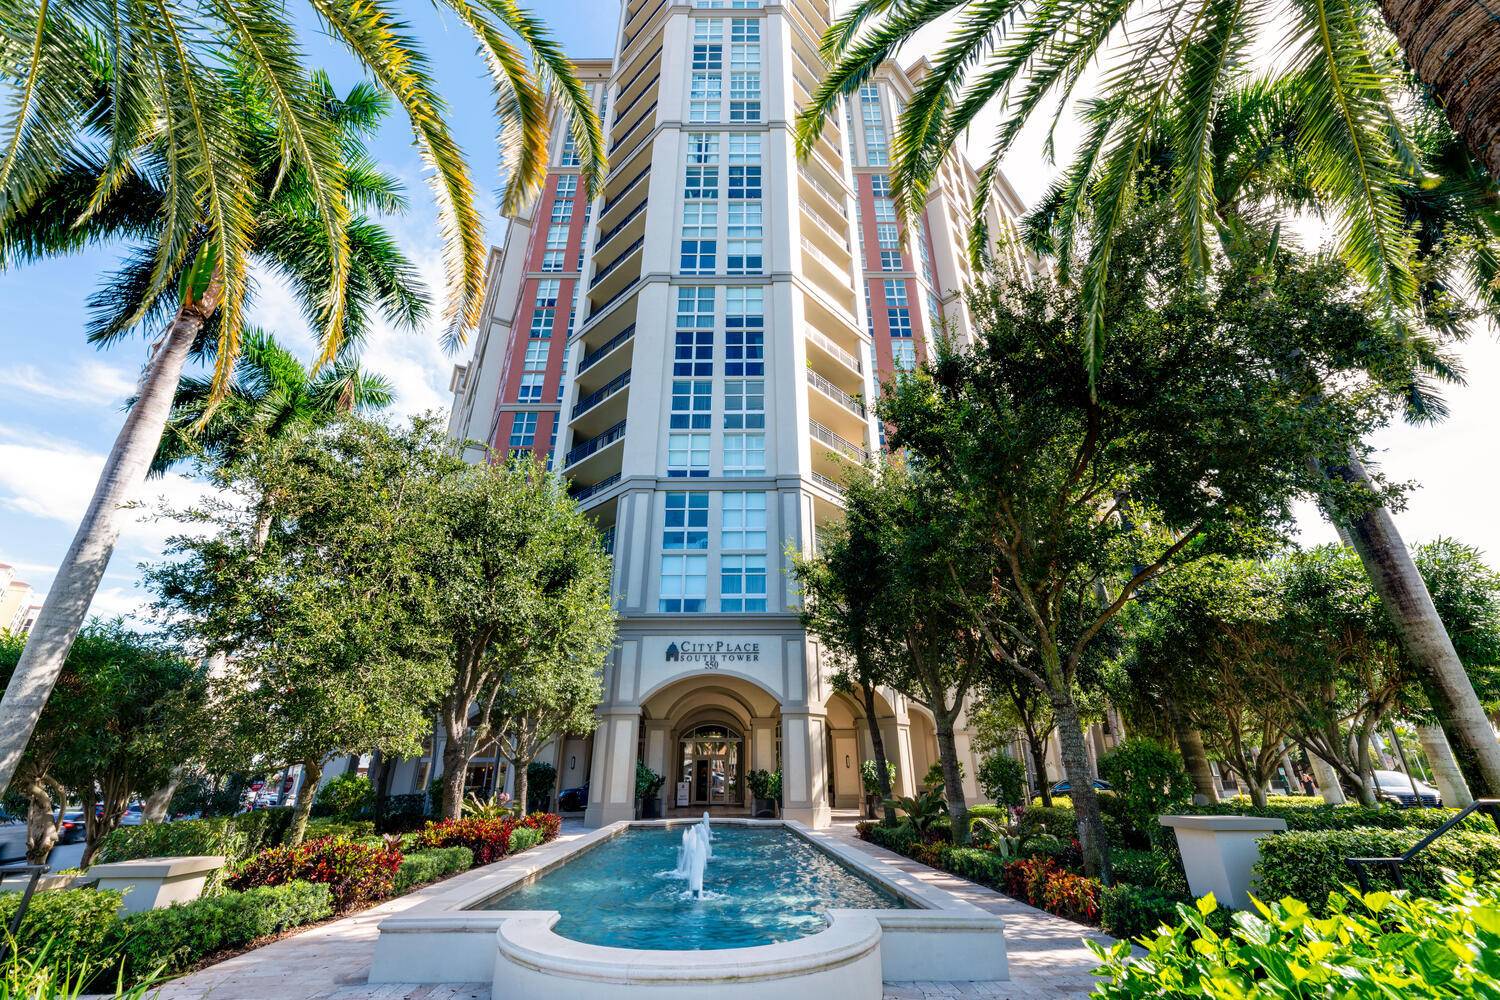 Cityplace South Tower is a full service luxury building in the center of WPB Full time concierge, valet parking, resort style pool.